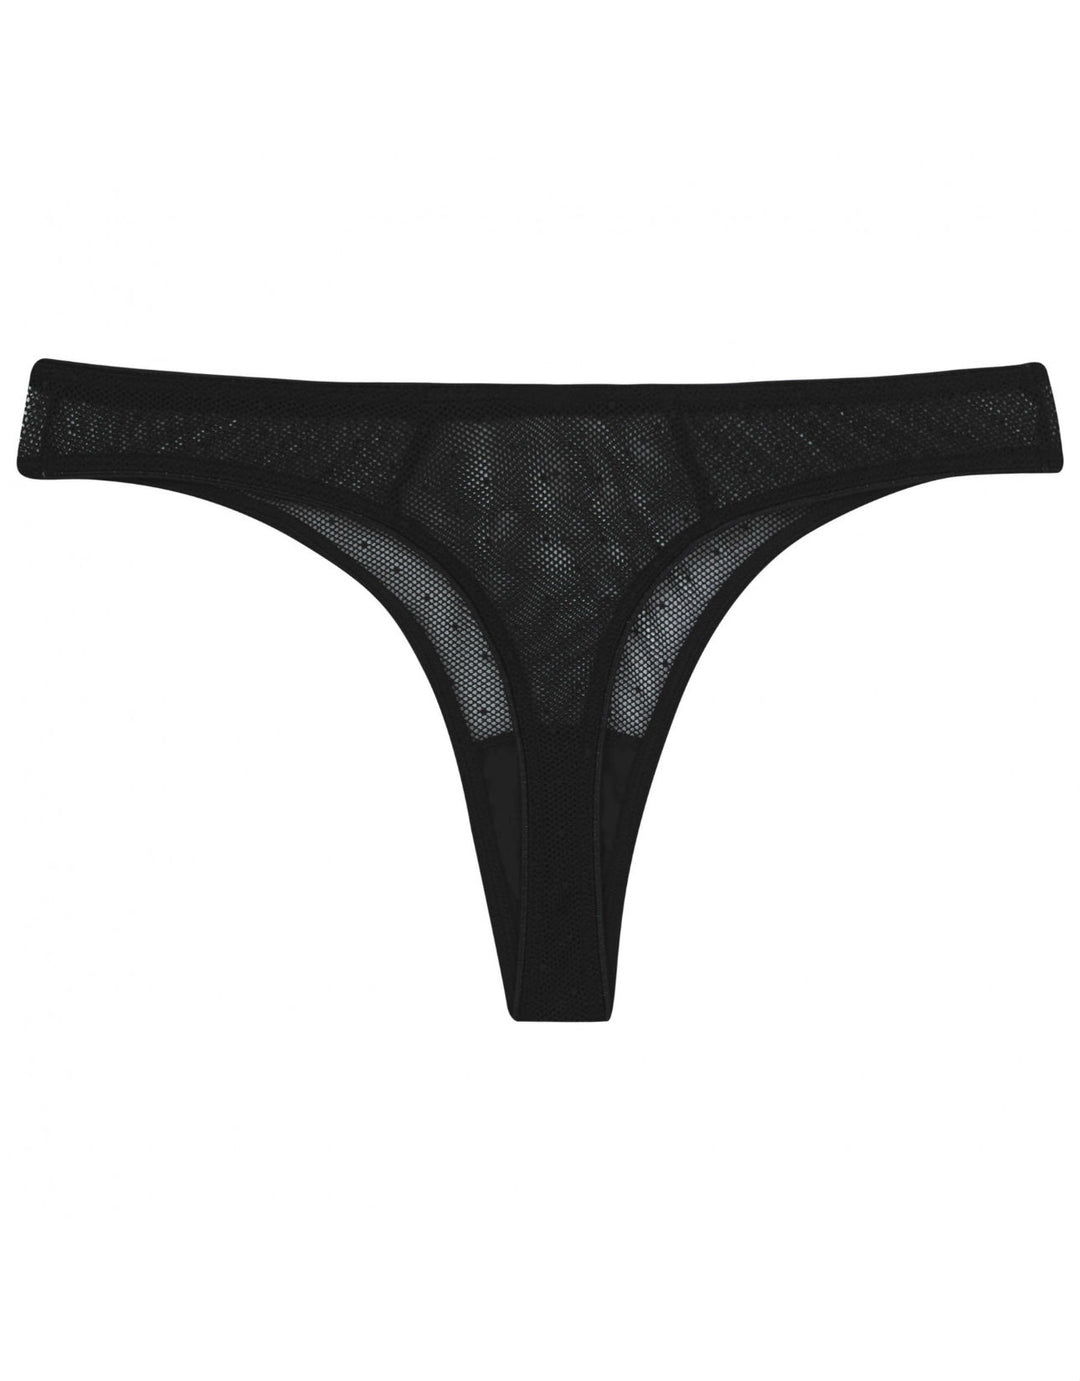 Jabouley Black Lace Hipster Thong